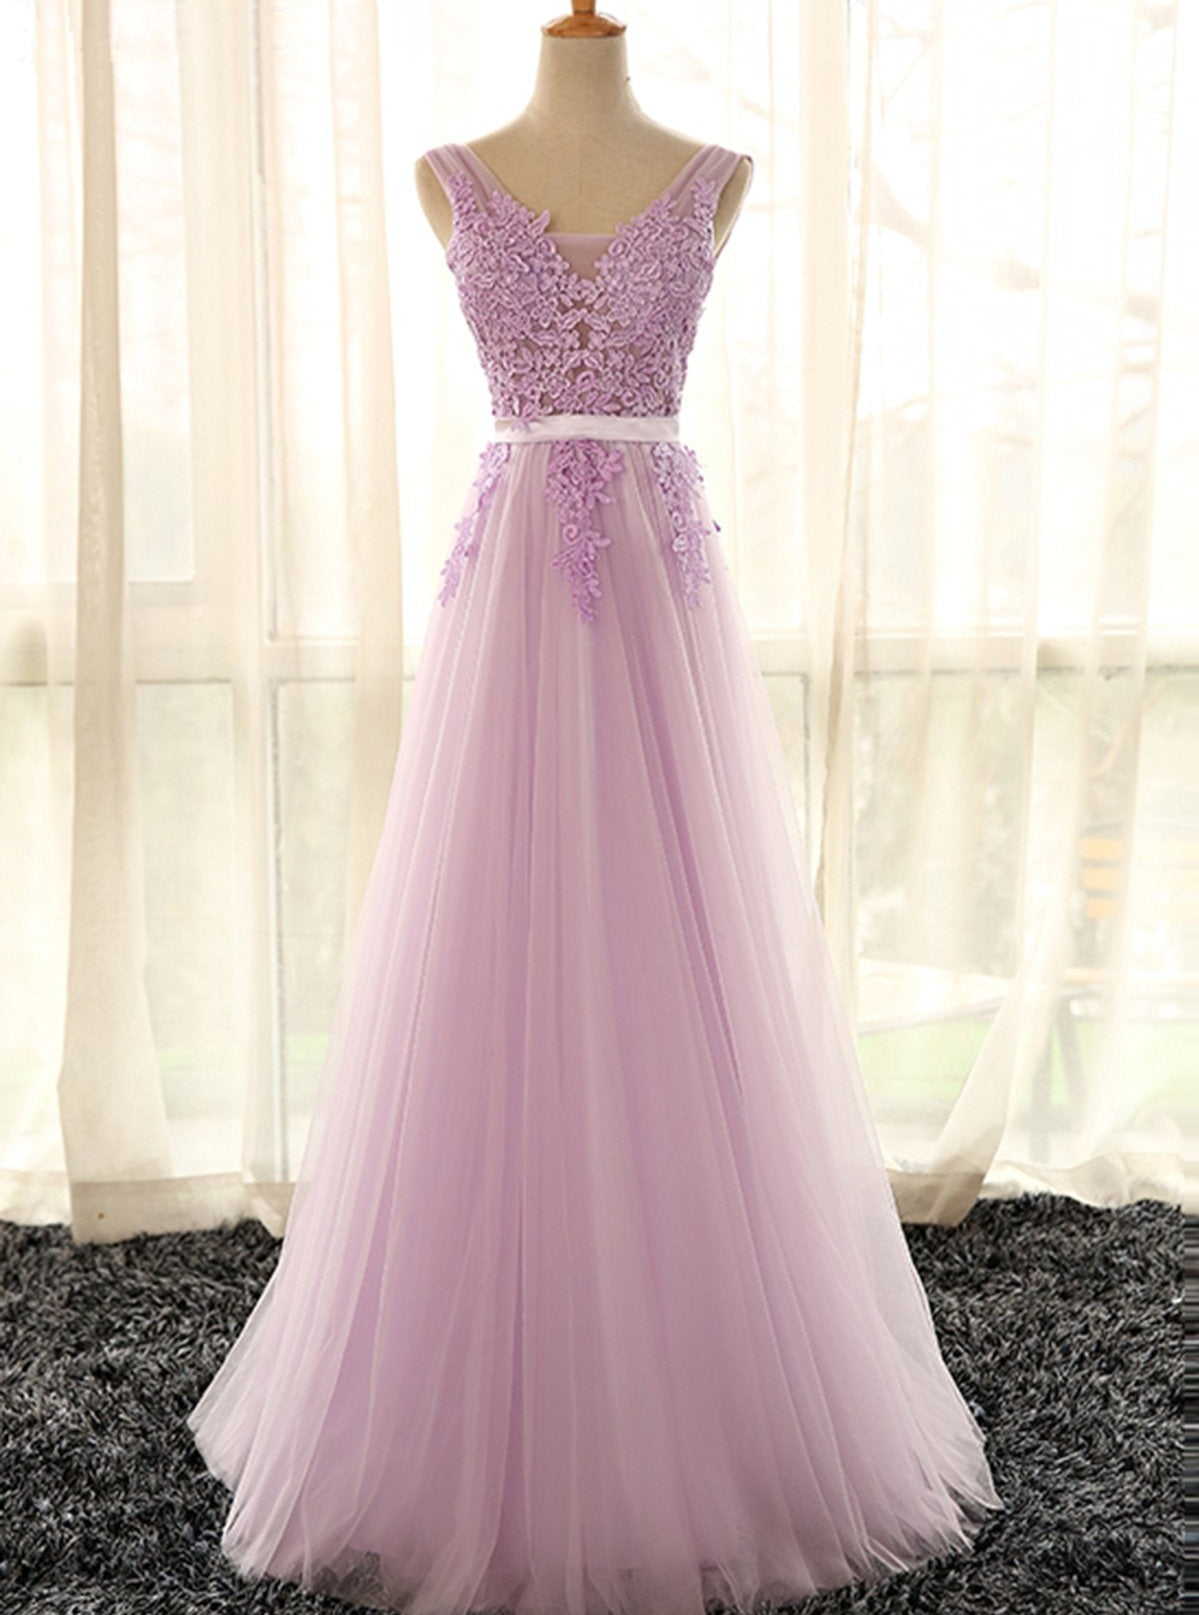 Lovely Tulle Lilac V-neckline Party Dress, Long Evening Gown